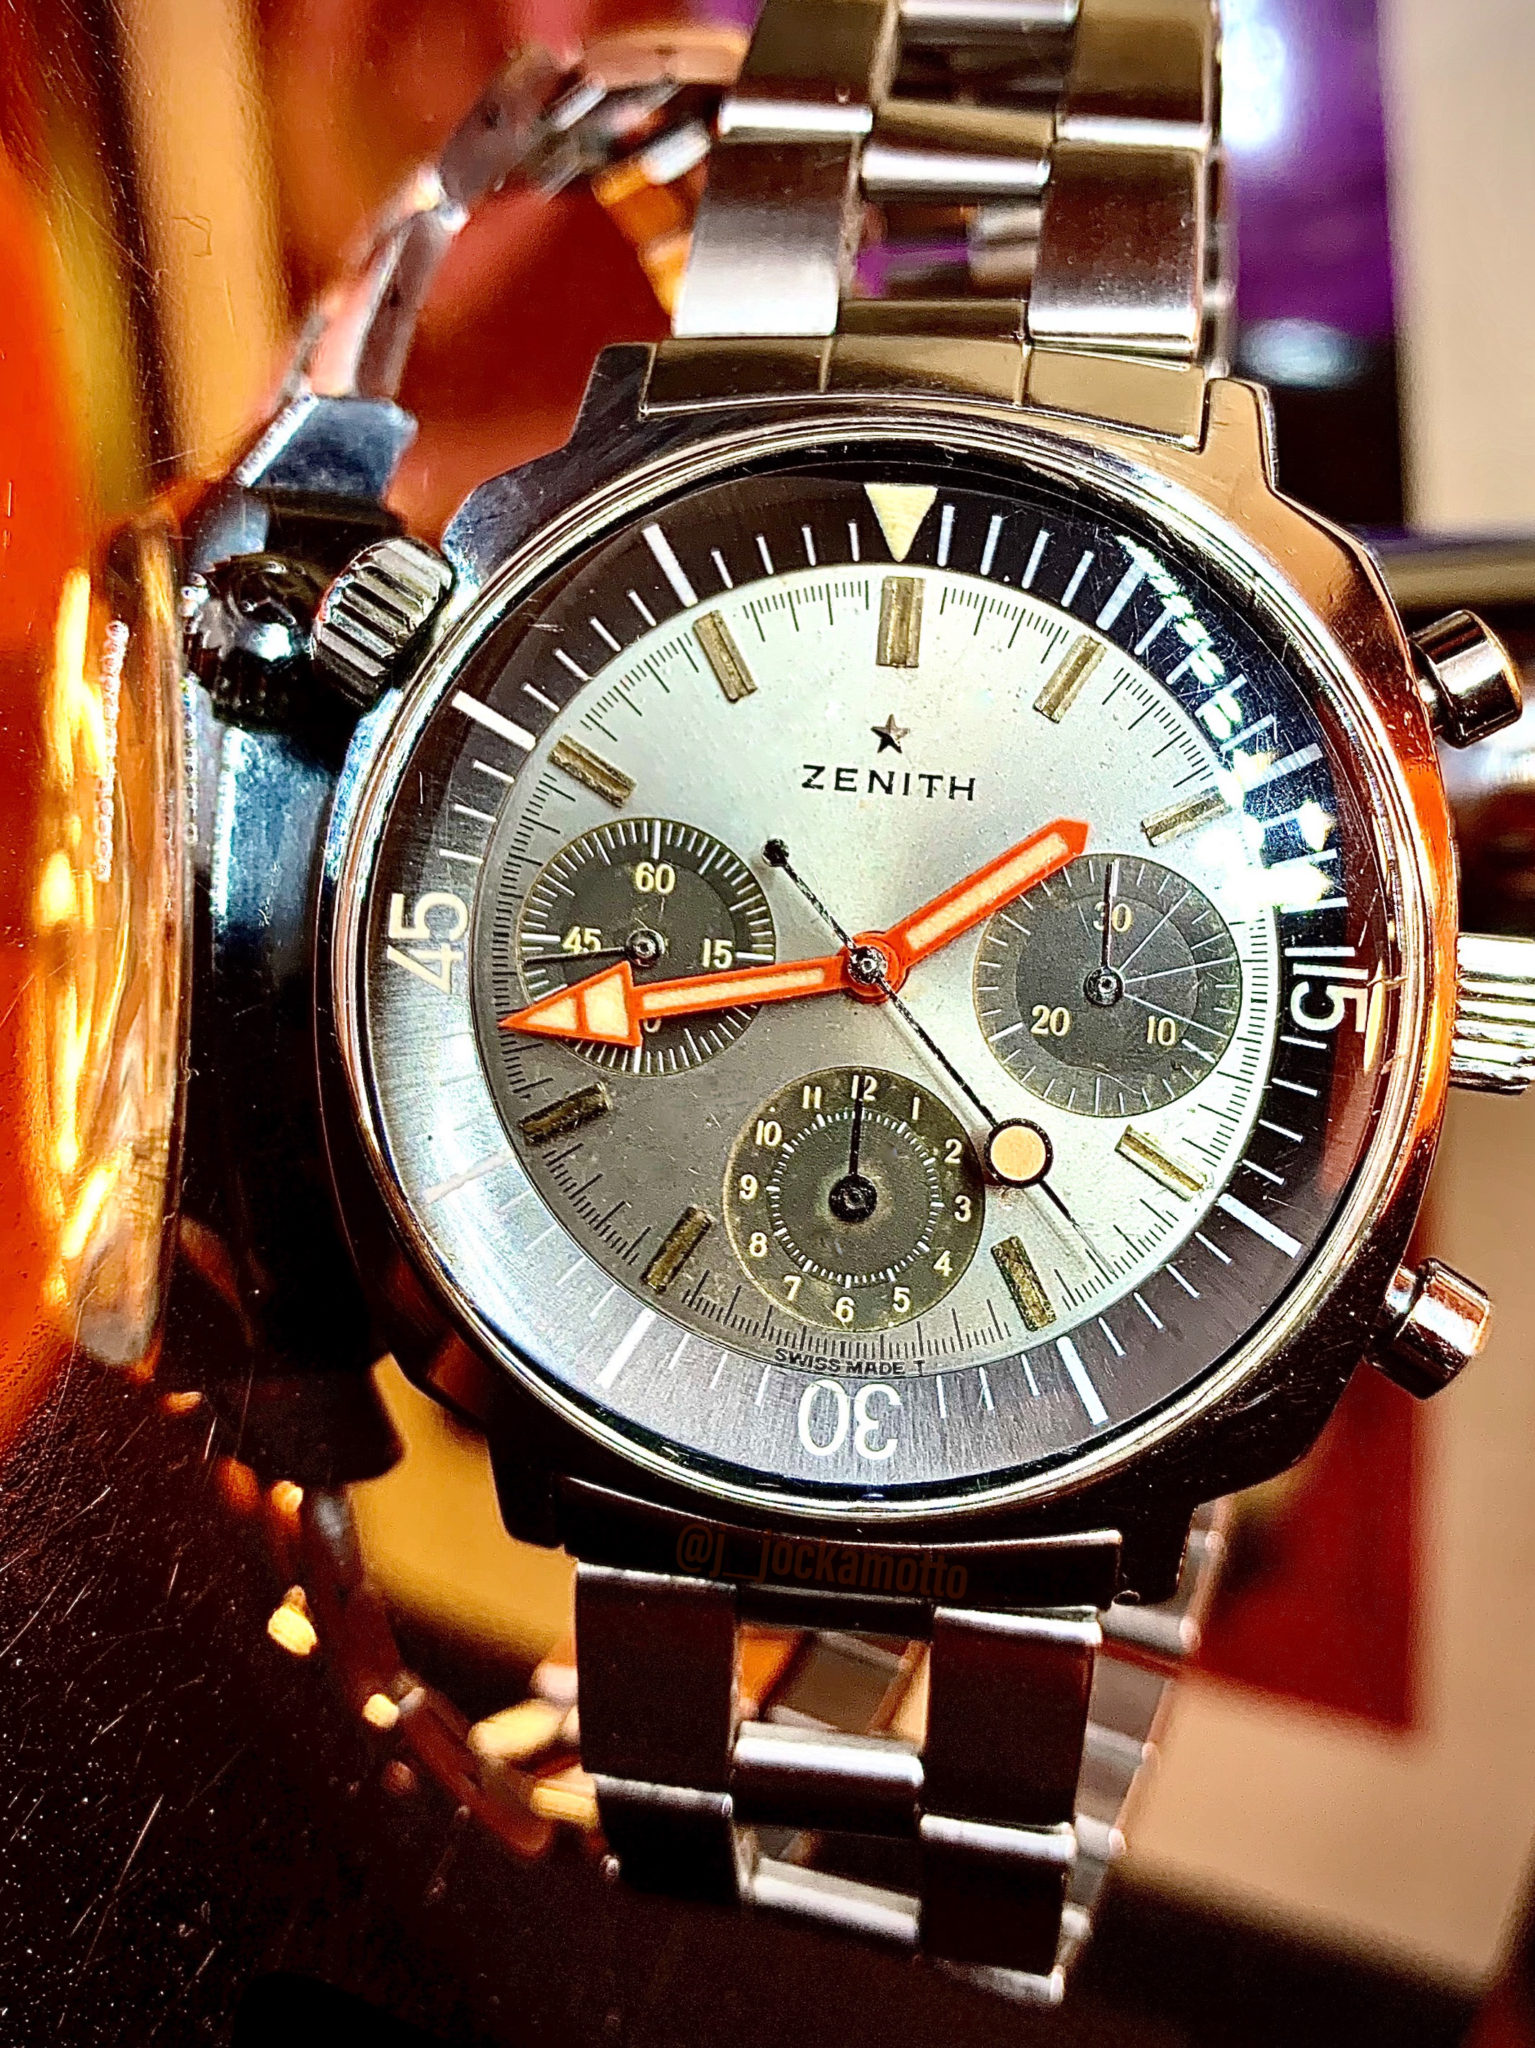 Owner Review: Zenith A3736 Chronograph – My watch Zenith